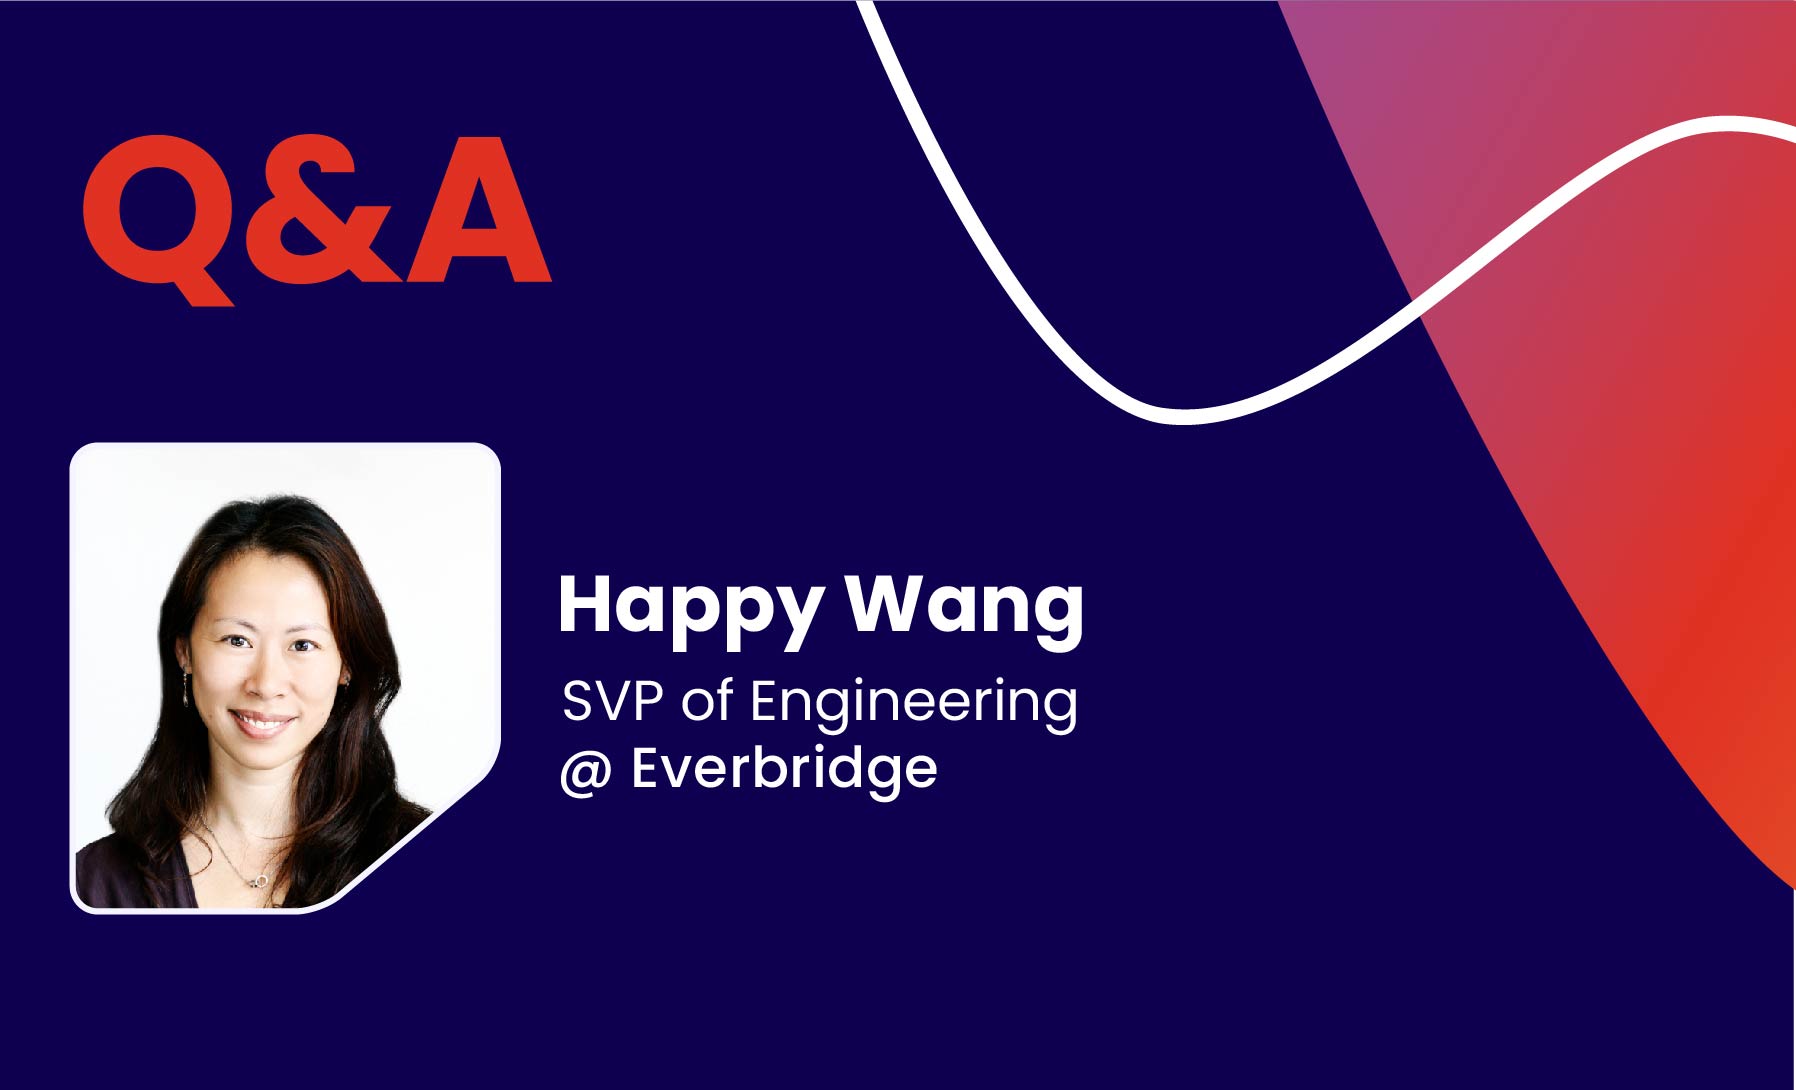 Q&A with Happy Wang, SVP of Engineering @ Everbridge